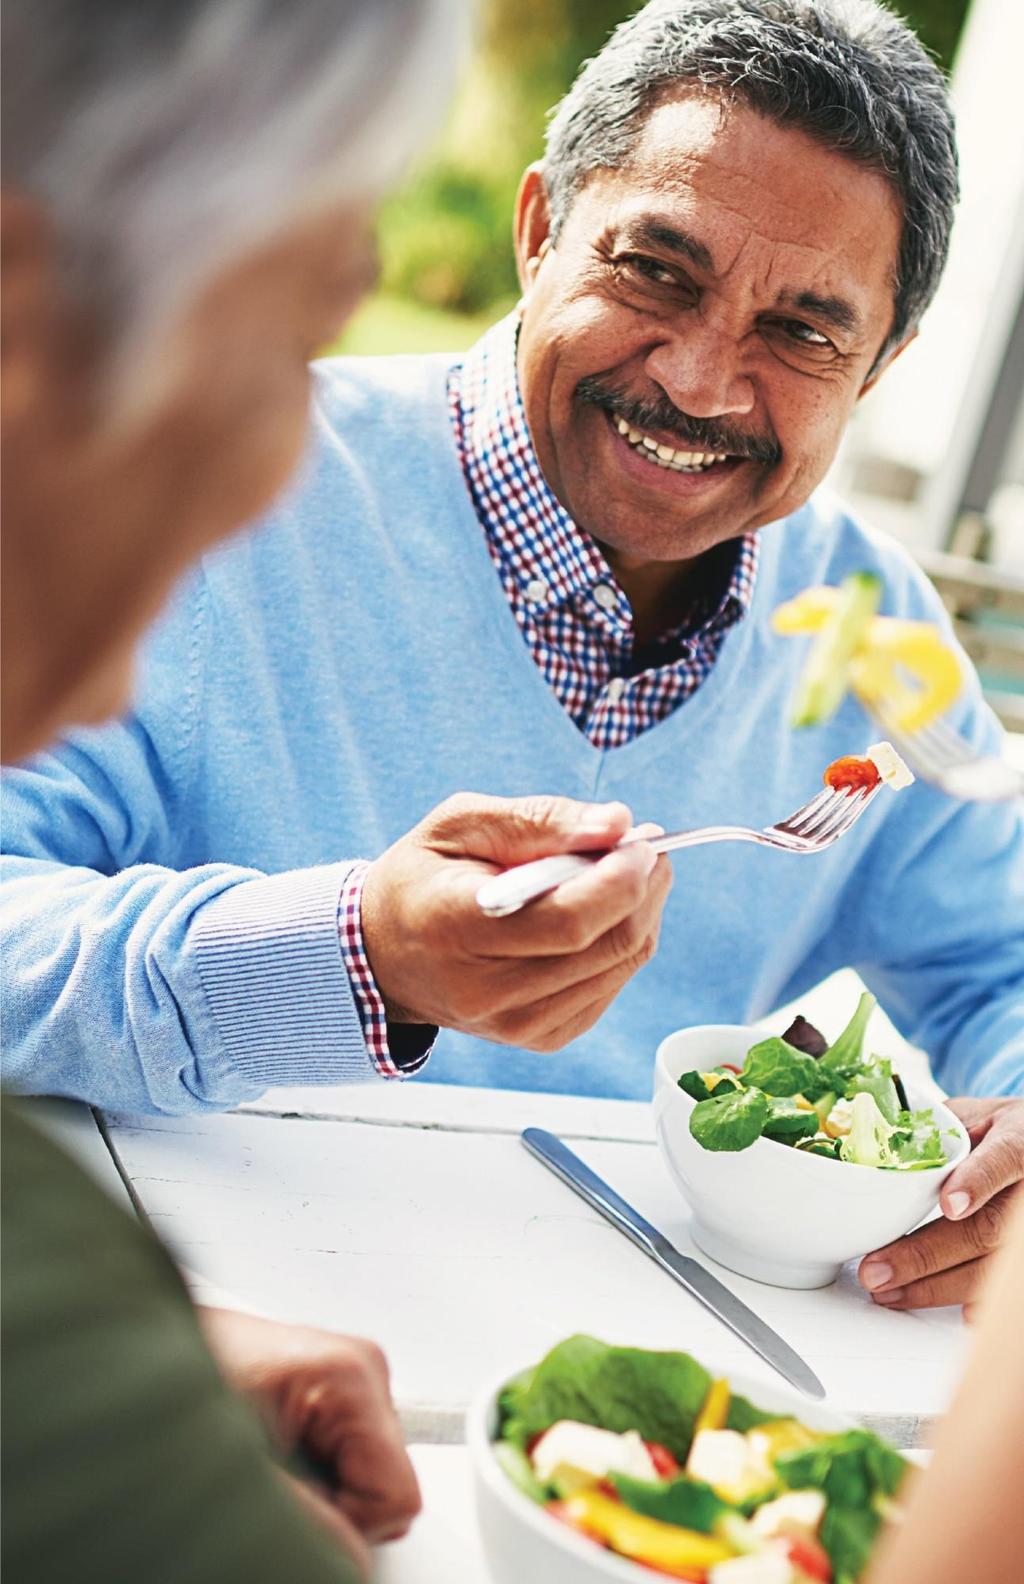 HEALTHY EATING Older adults are highly motivated to achieve better health, and are more likely to adopt healthy eating behaviors compared to their younger counterparts.